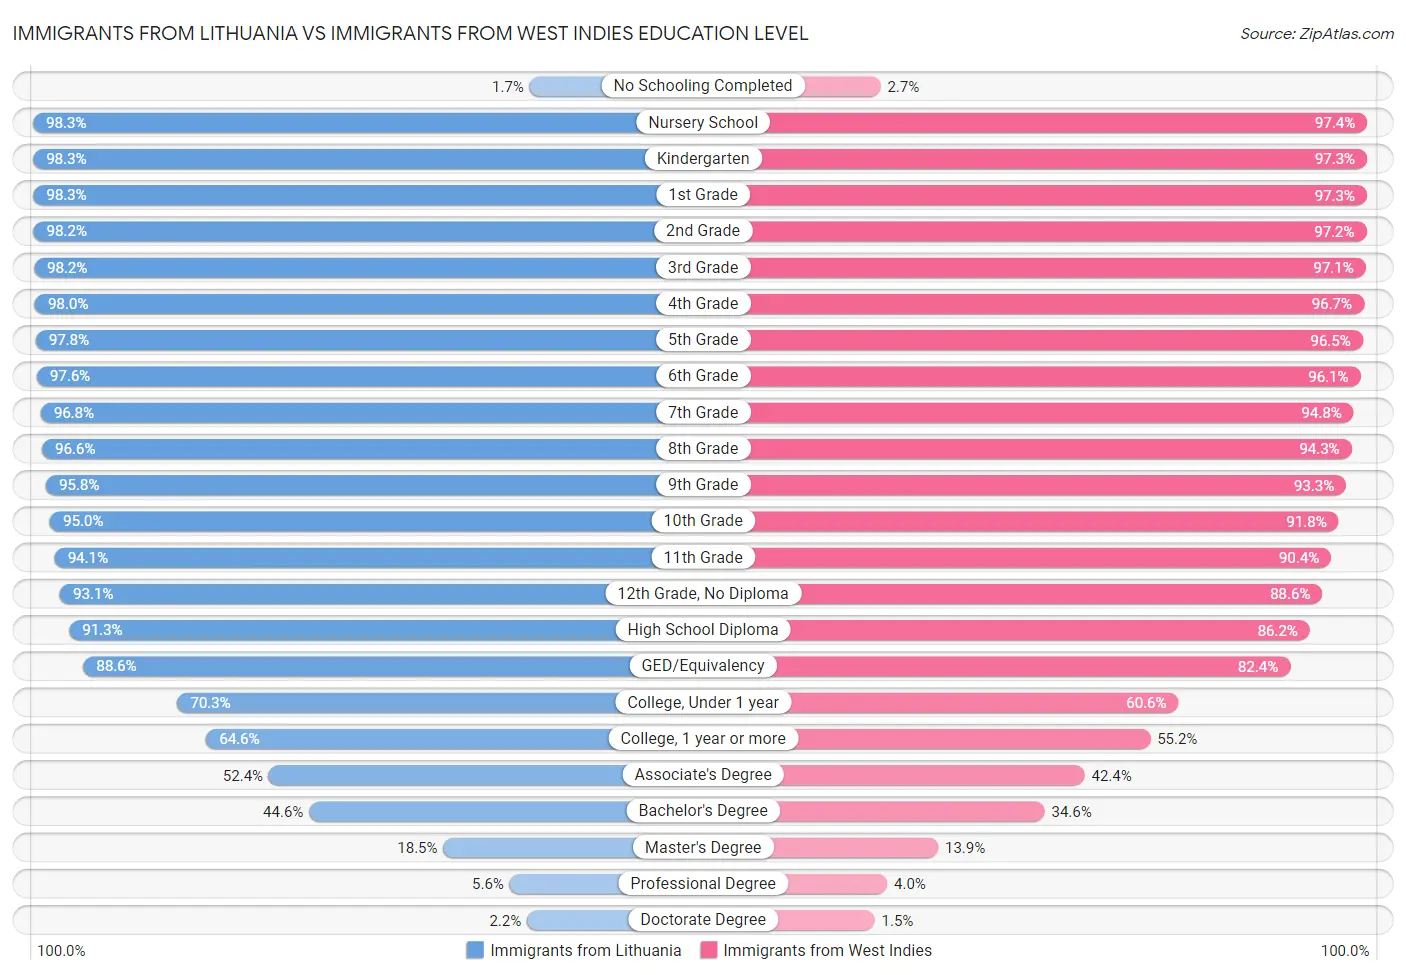 Immigrants from Lithuania vs Immigrants from West Indies Education Level